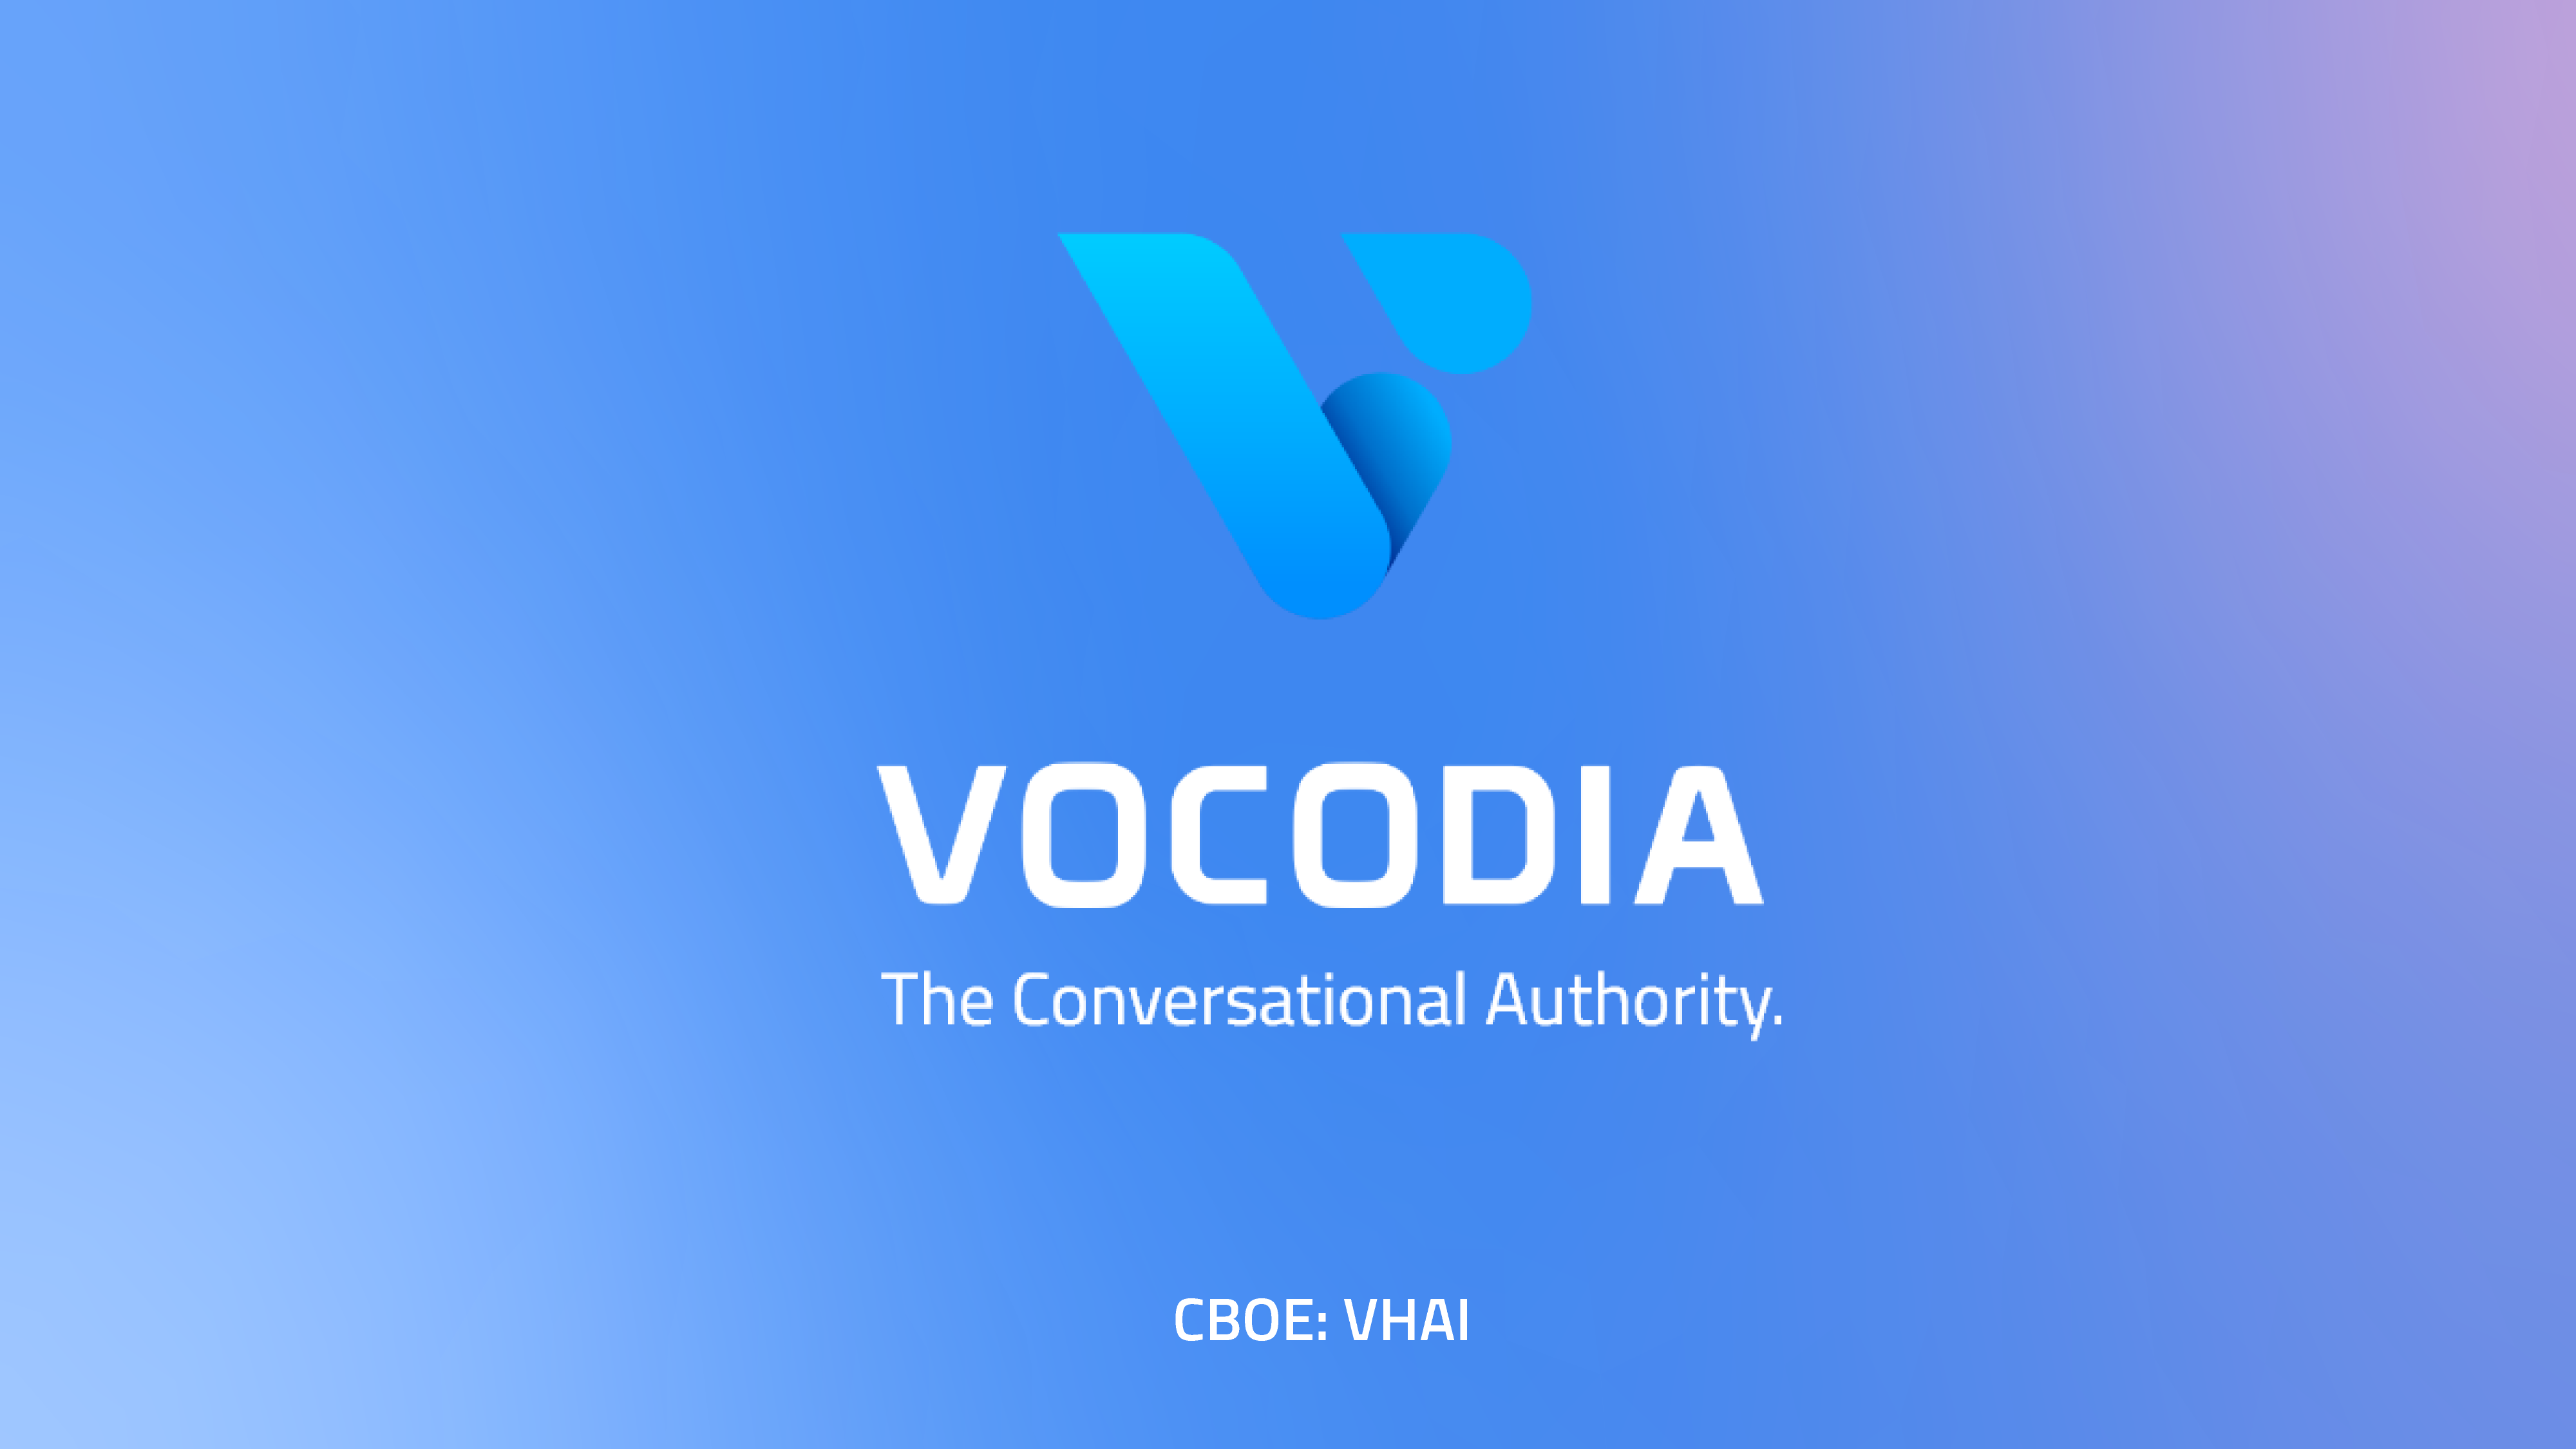 Vocodia Conversational AI Technology Looks Attractive After Nvidia Reveals Quest For Specialized Technology 